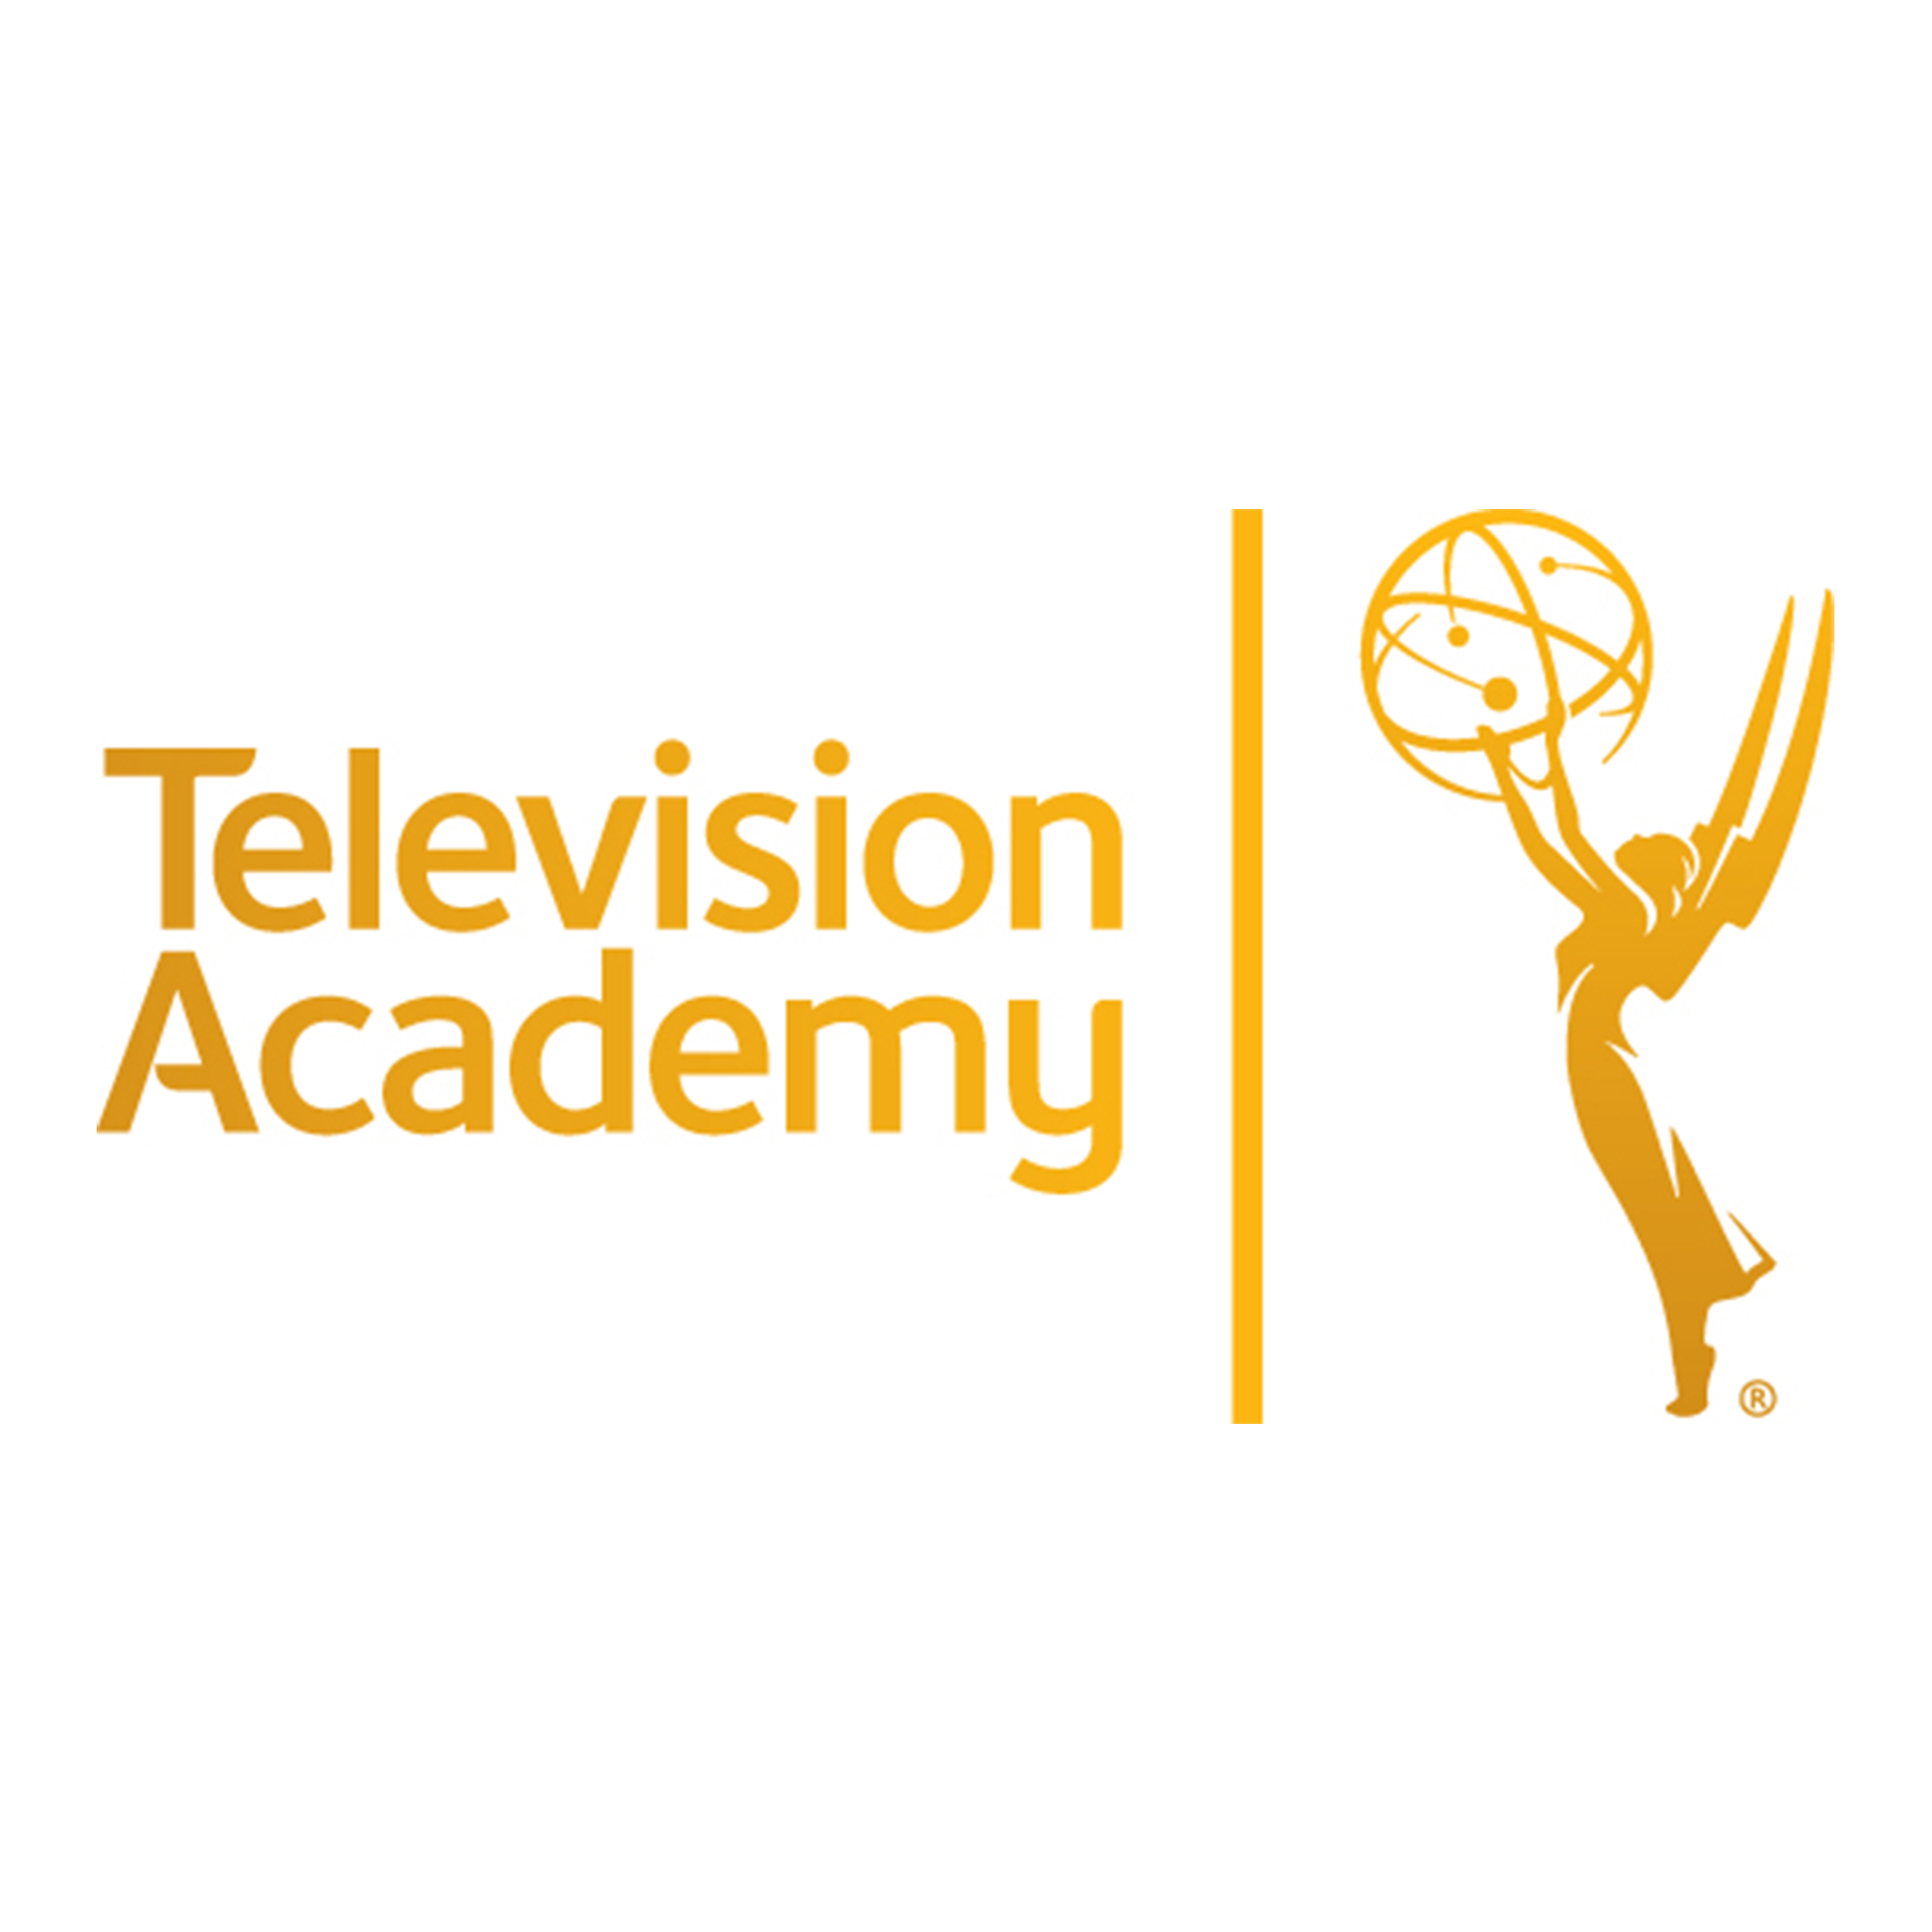 EOAD-Clients-Television Academy.jpg